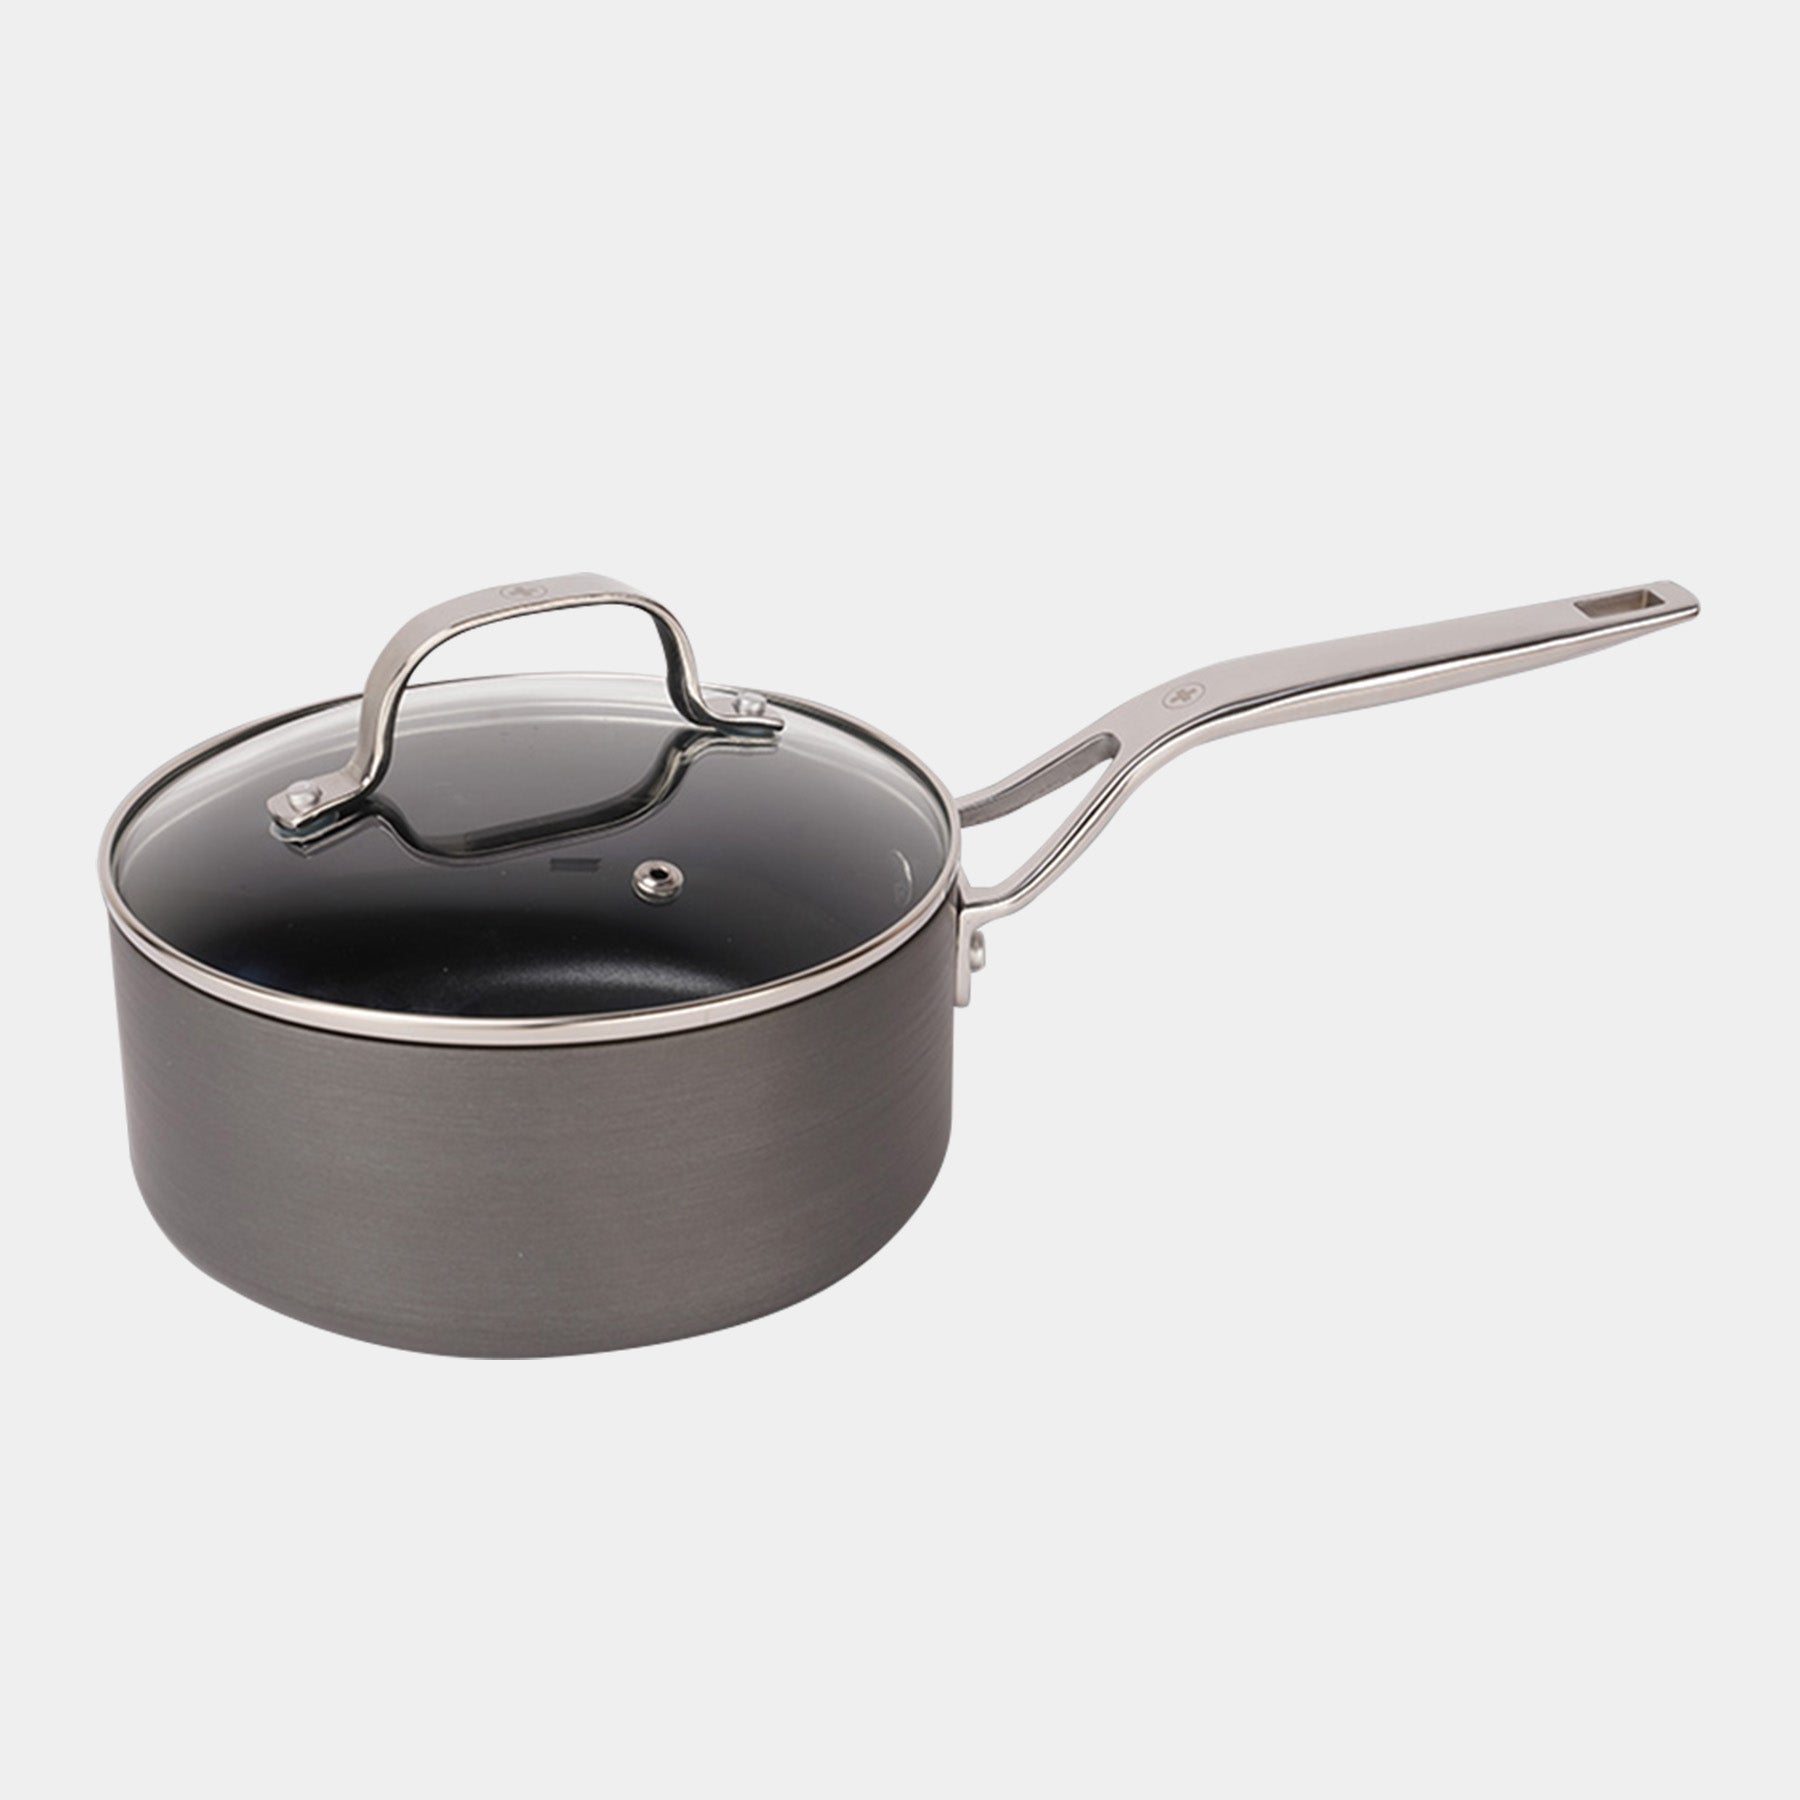 Hard Anodised 2 qt Saucepan with Glass Lid - Induction